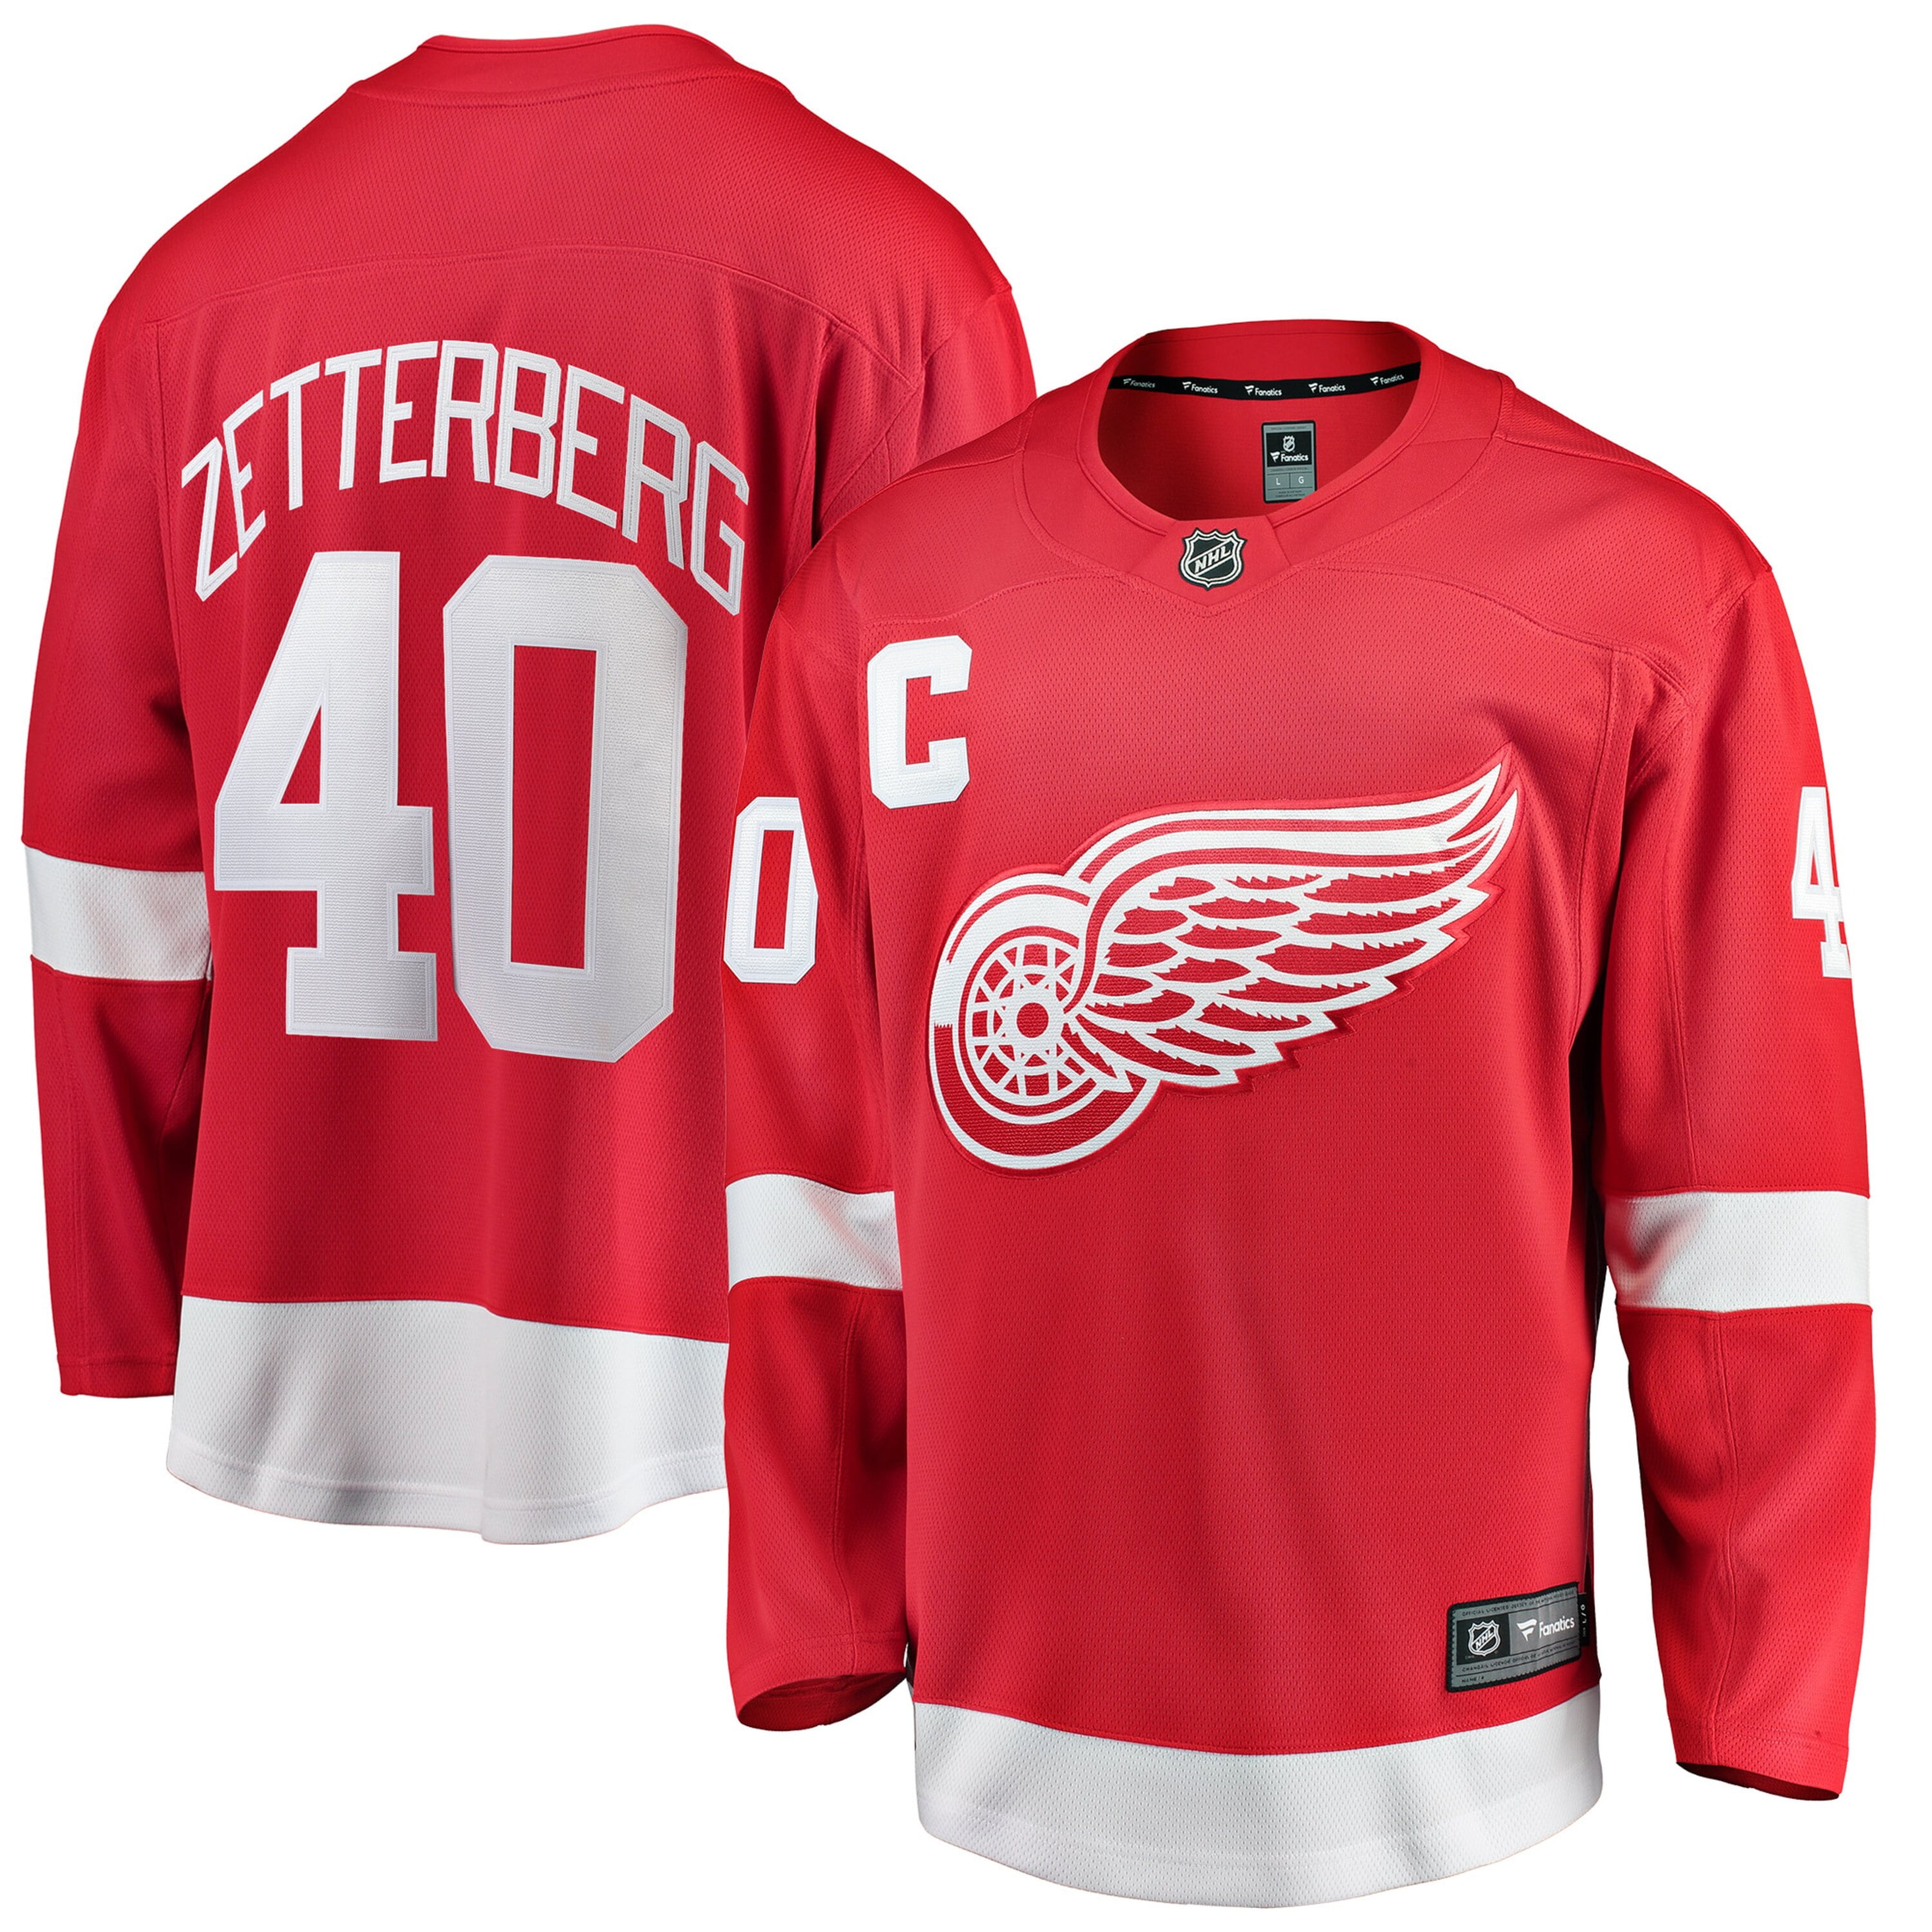 zetterberg jersey with c